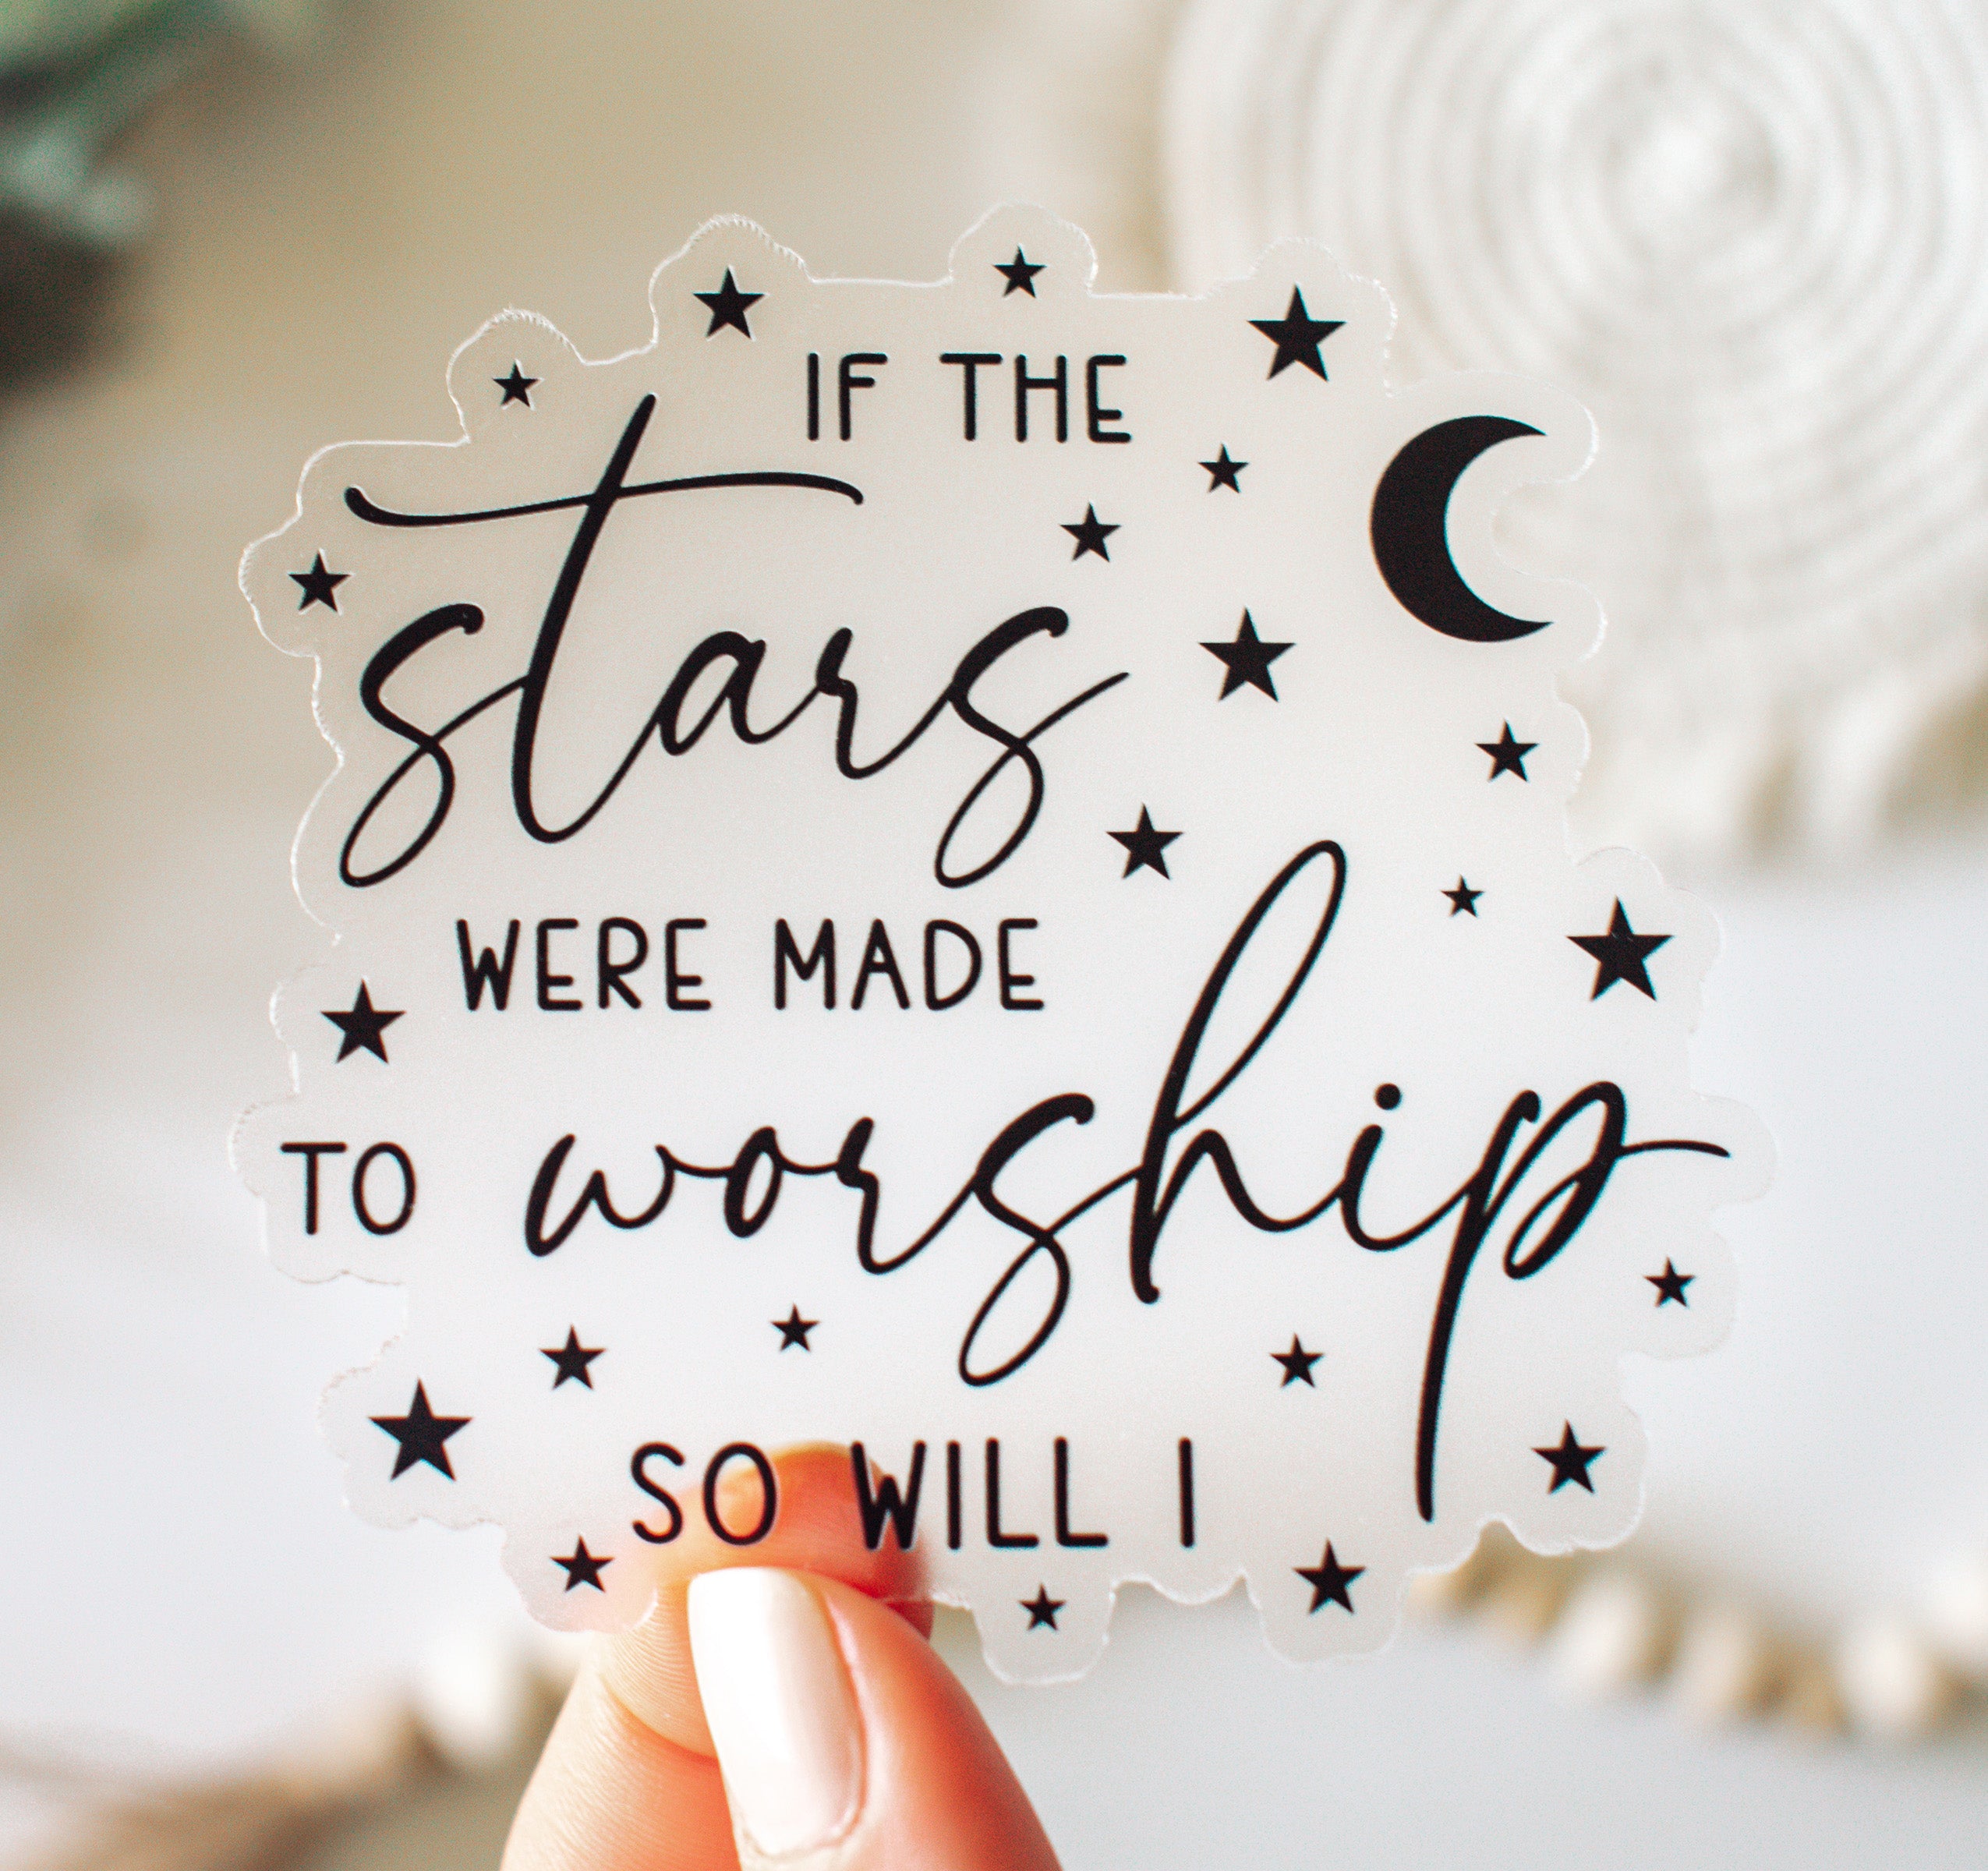 If the stars were made to worship so will I Christian music sticker with the moon and stars